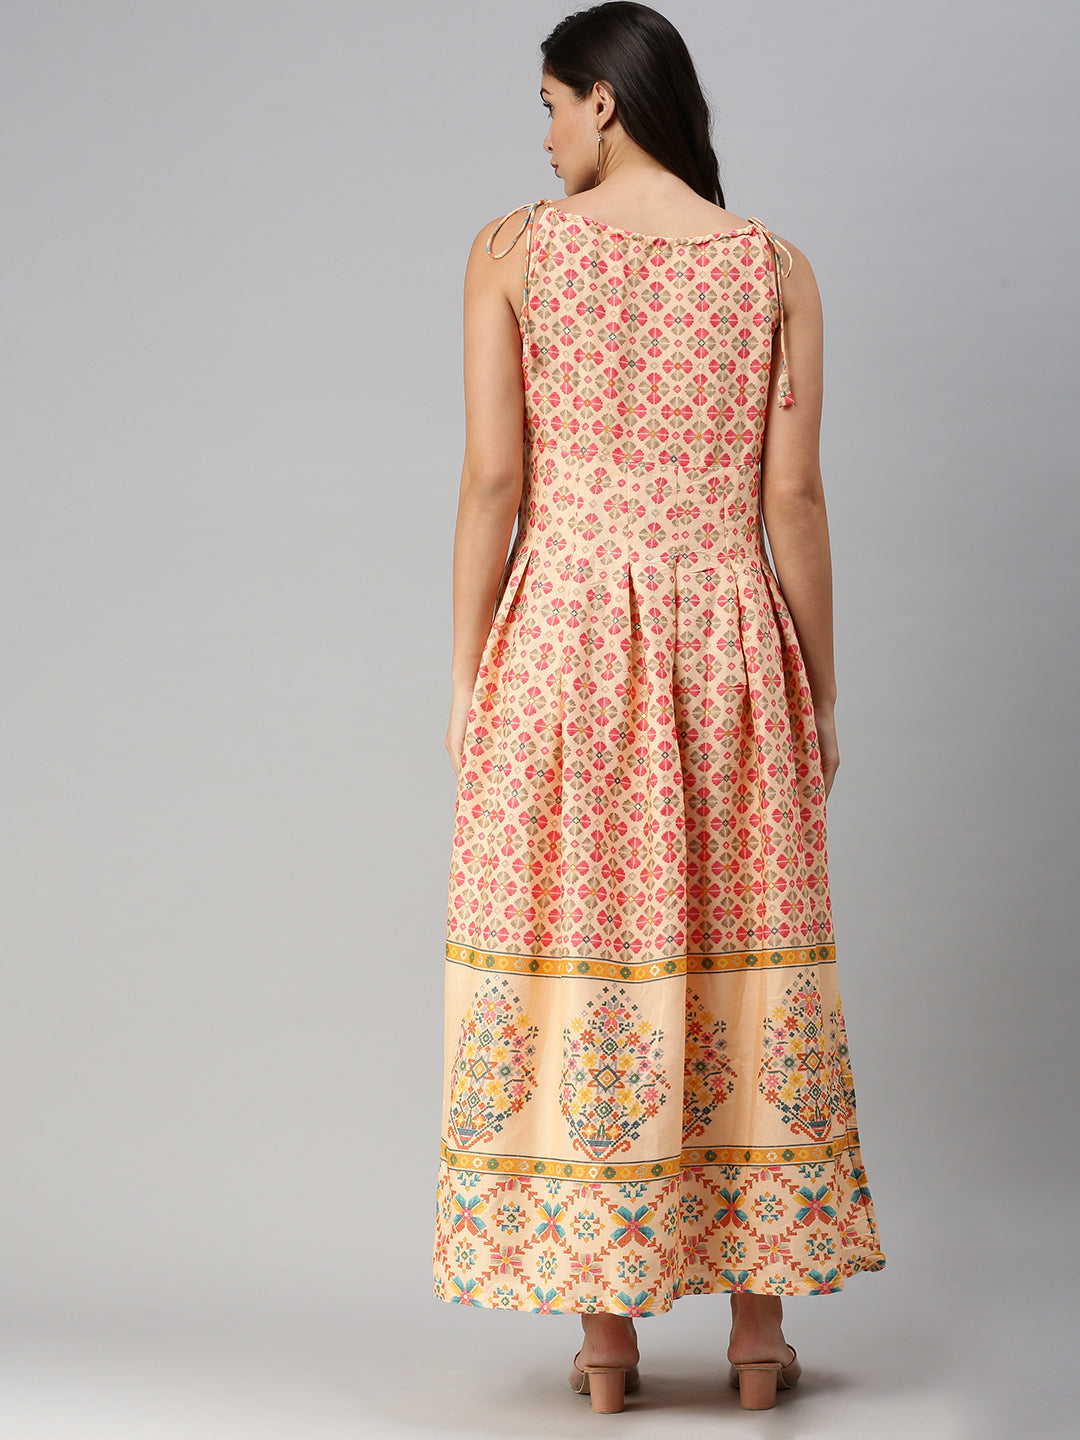 Women's Ethnic Motifs Peach Fit and Flare Dress